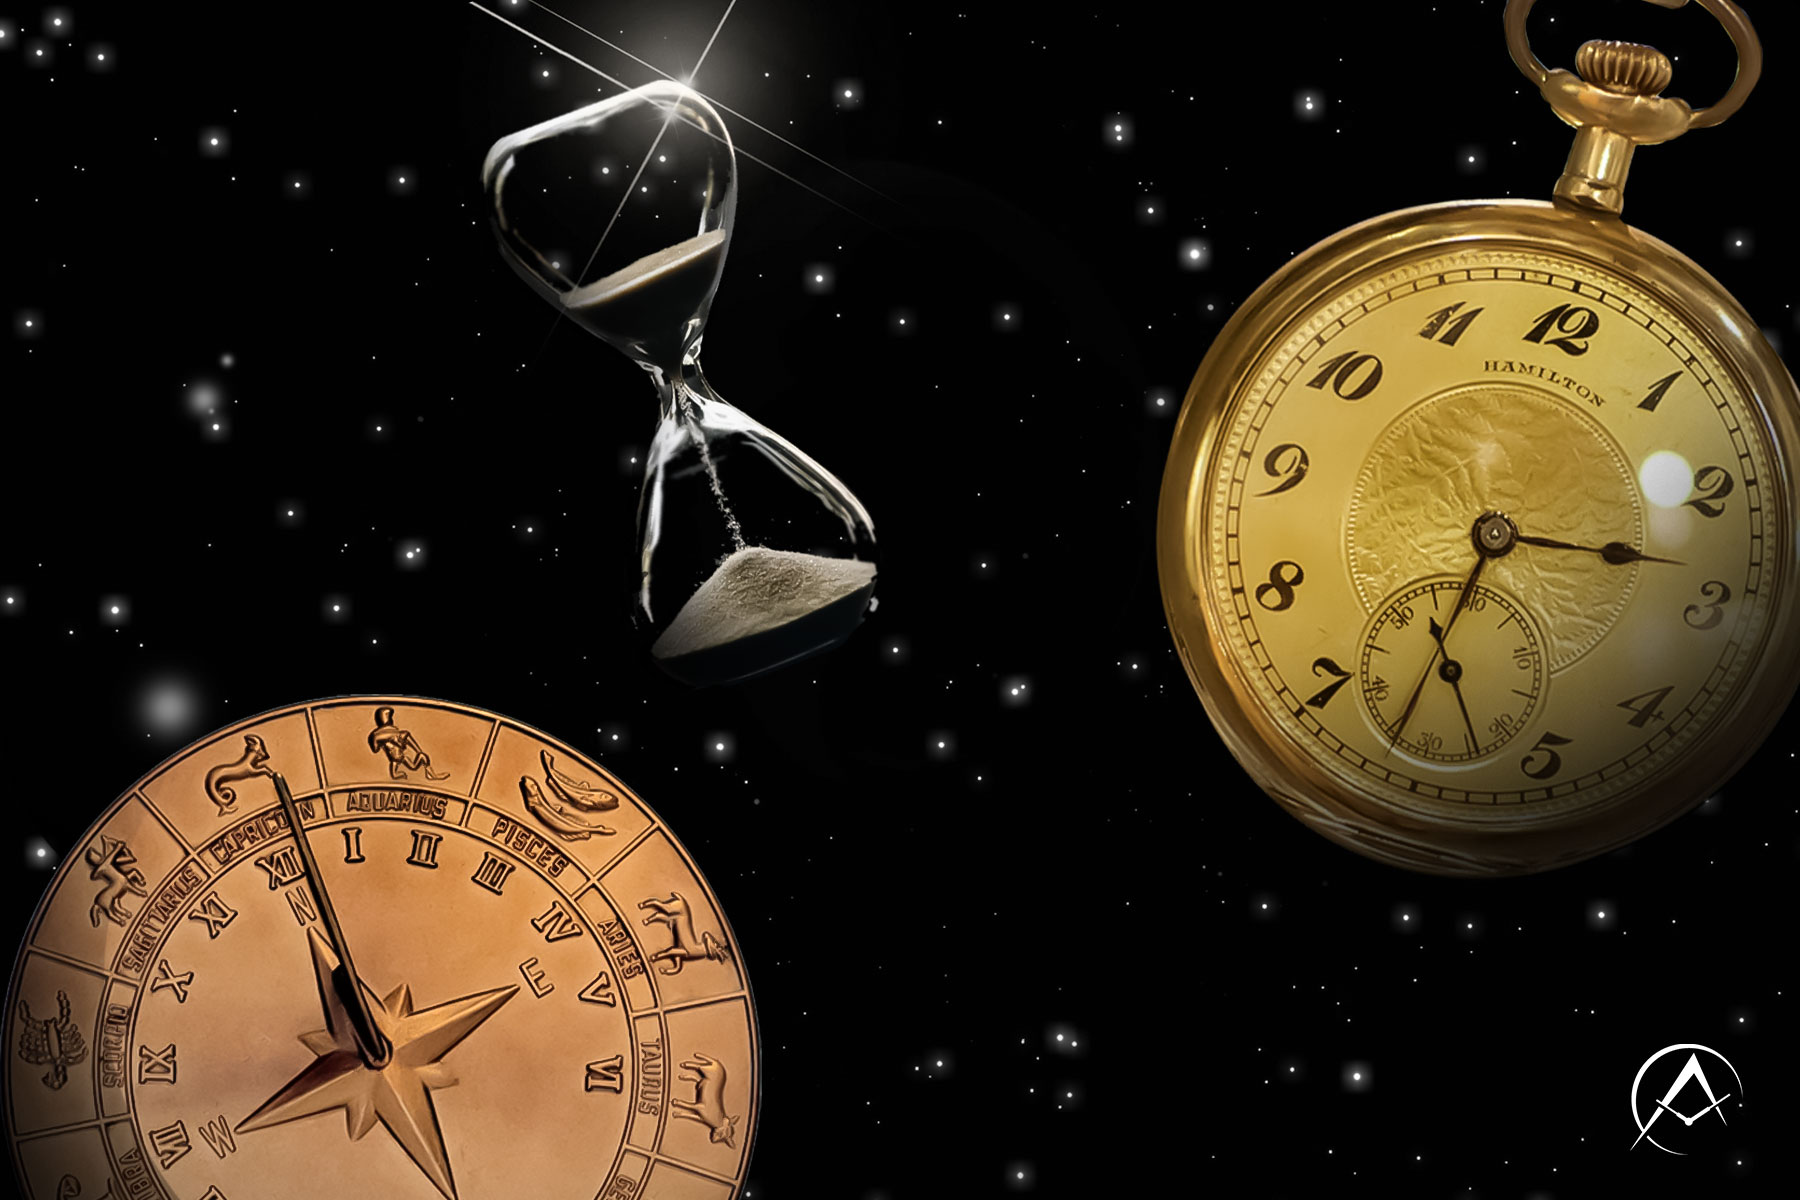 A Bronze Sundial, An Hourglass, and a Golden Pocket Watch on a Starry Black Background.